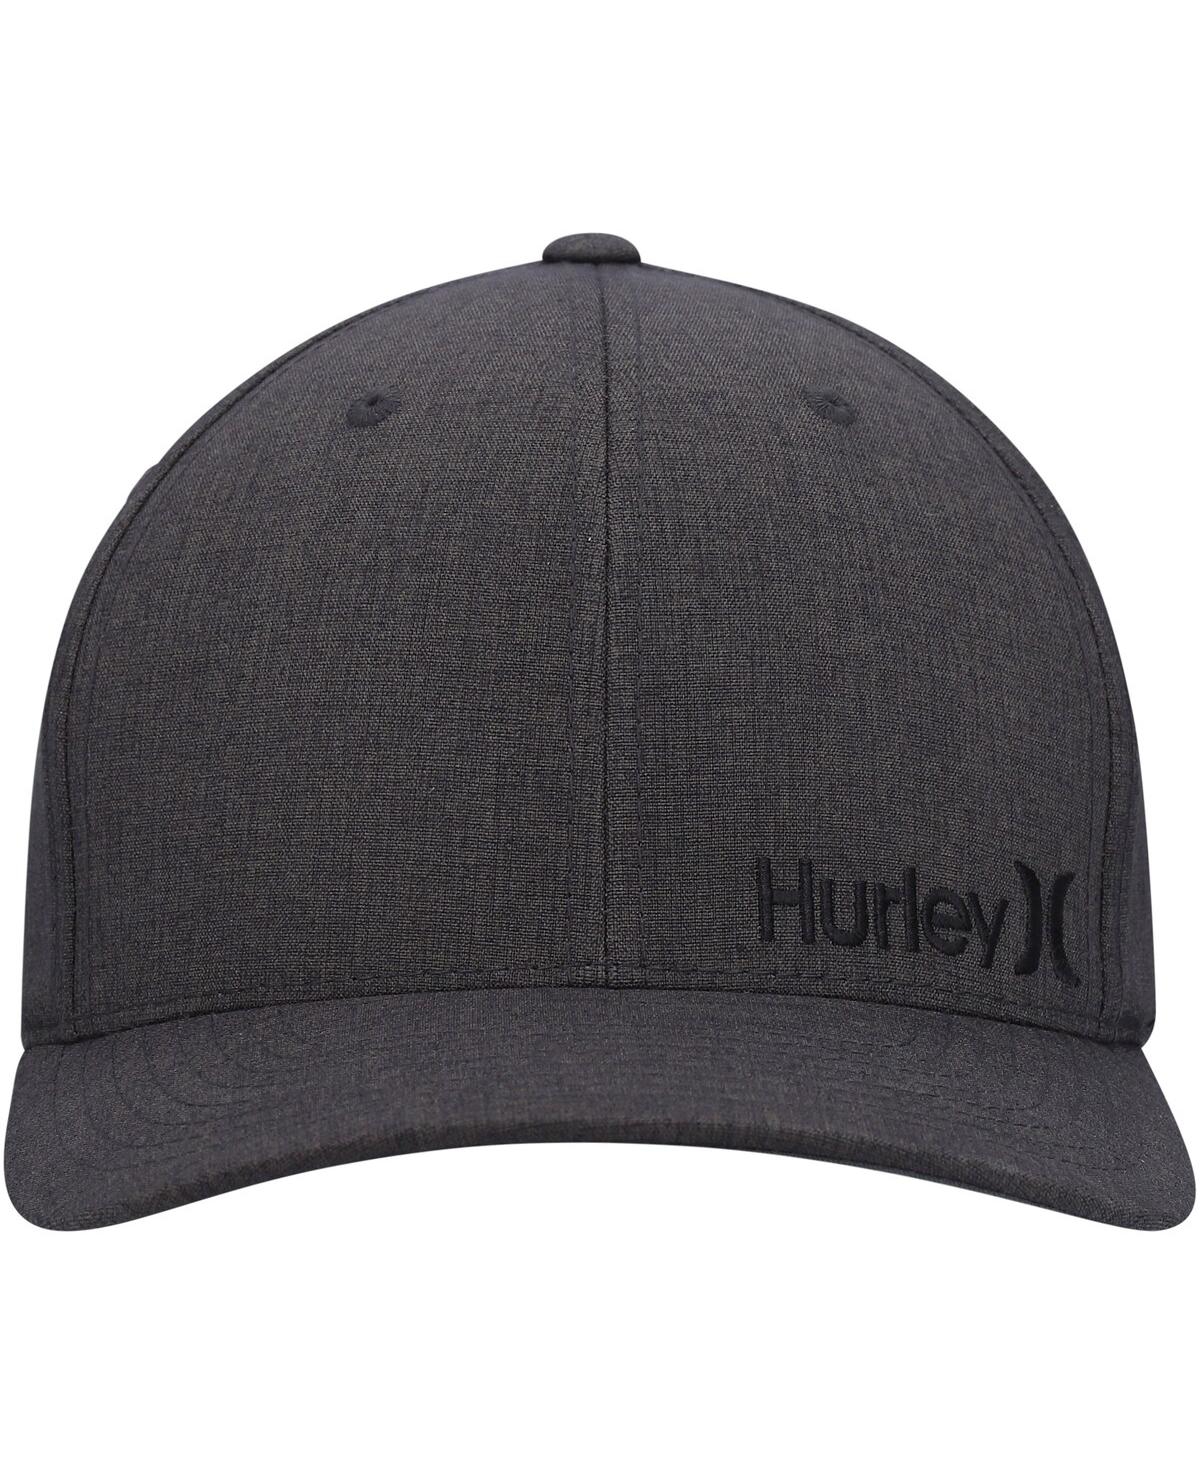 Shop Hurley Men's  Heathered Charcoal Corp Textured Tri-blend Flex Fit Hat